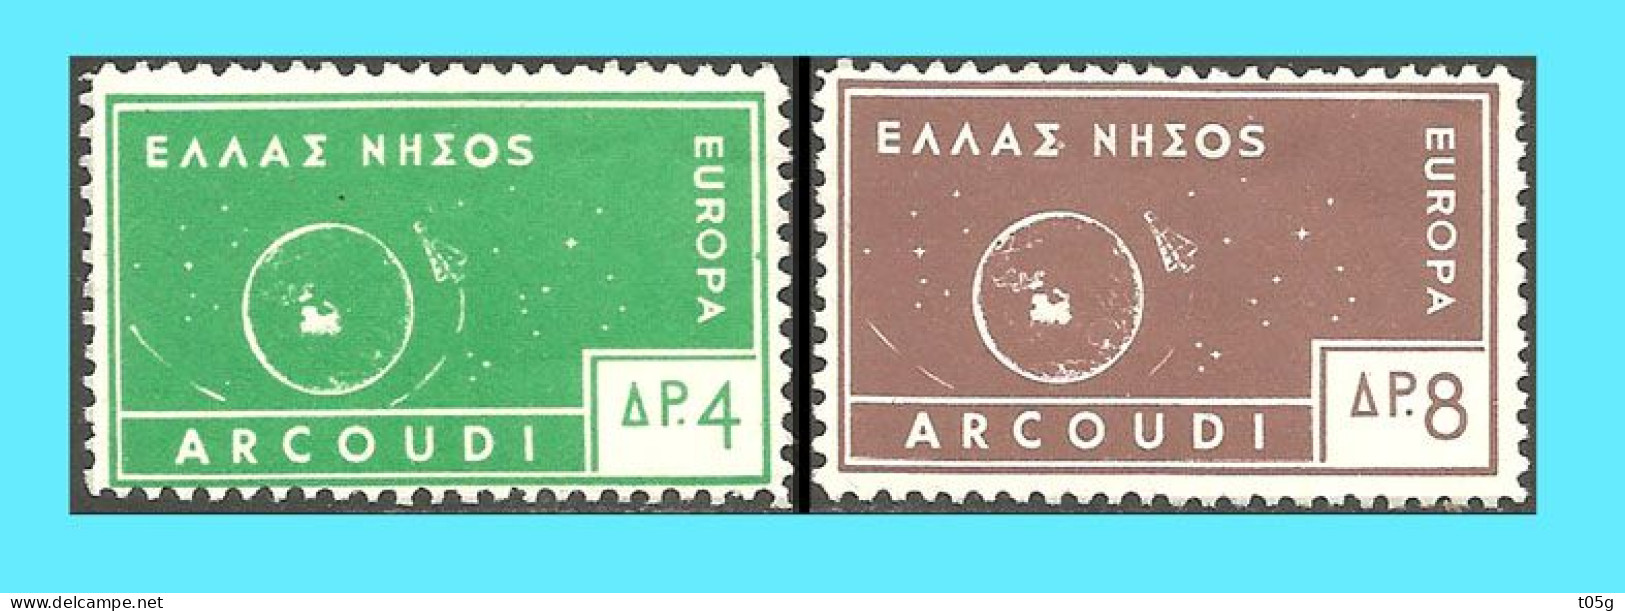 GREECE-GRECE-HELLAS - ITALY- IONIAN  ARCOUDI ISLAND -EUROPA 1963: Unofficial -private Issue - Compl. Set  MNH** - Neufs